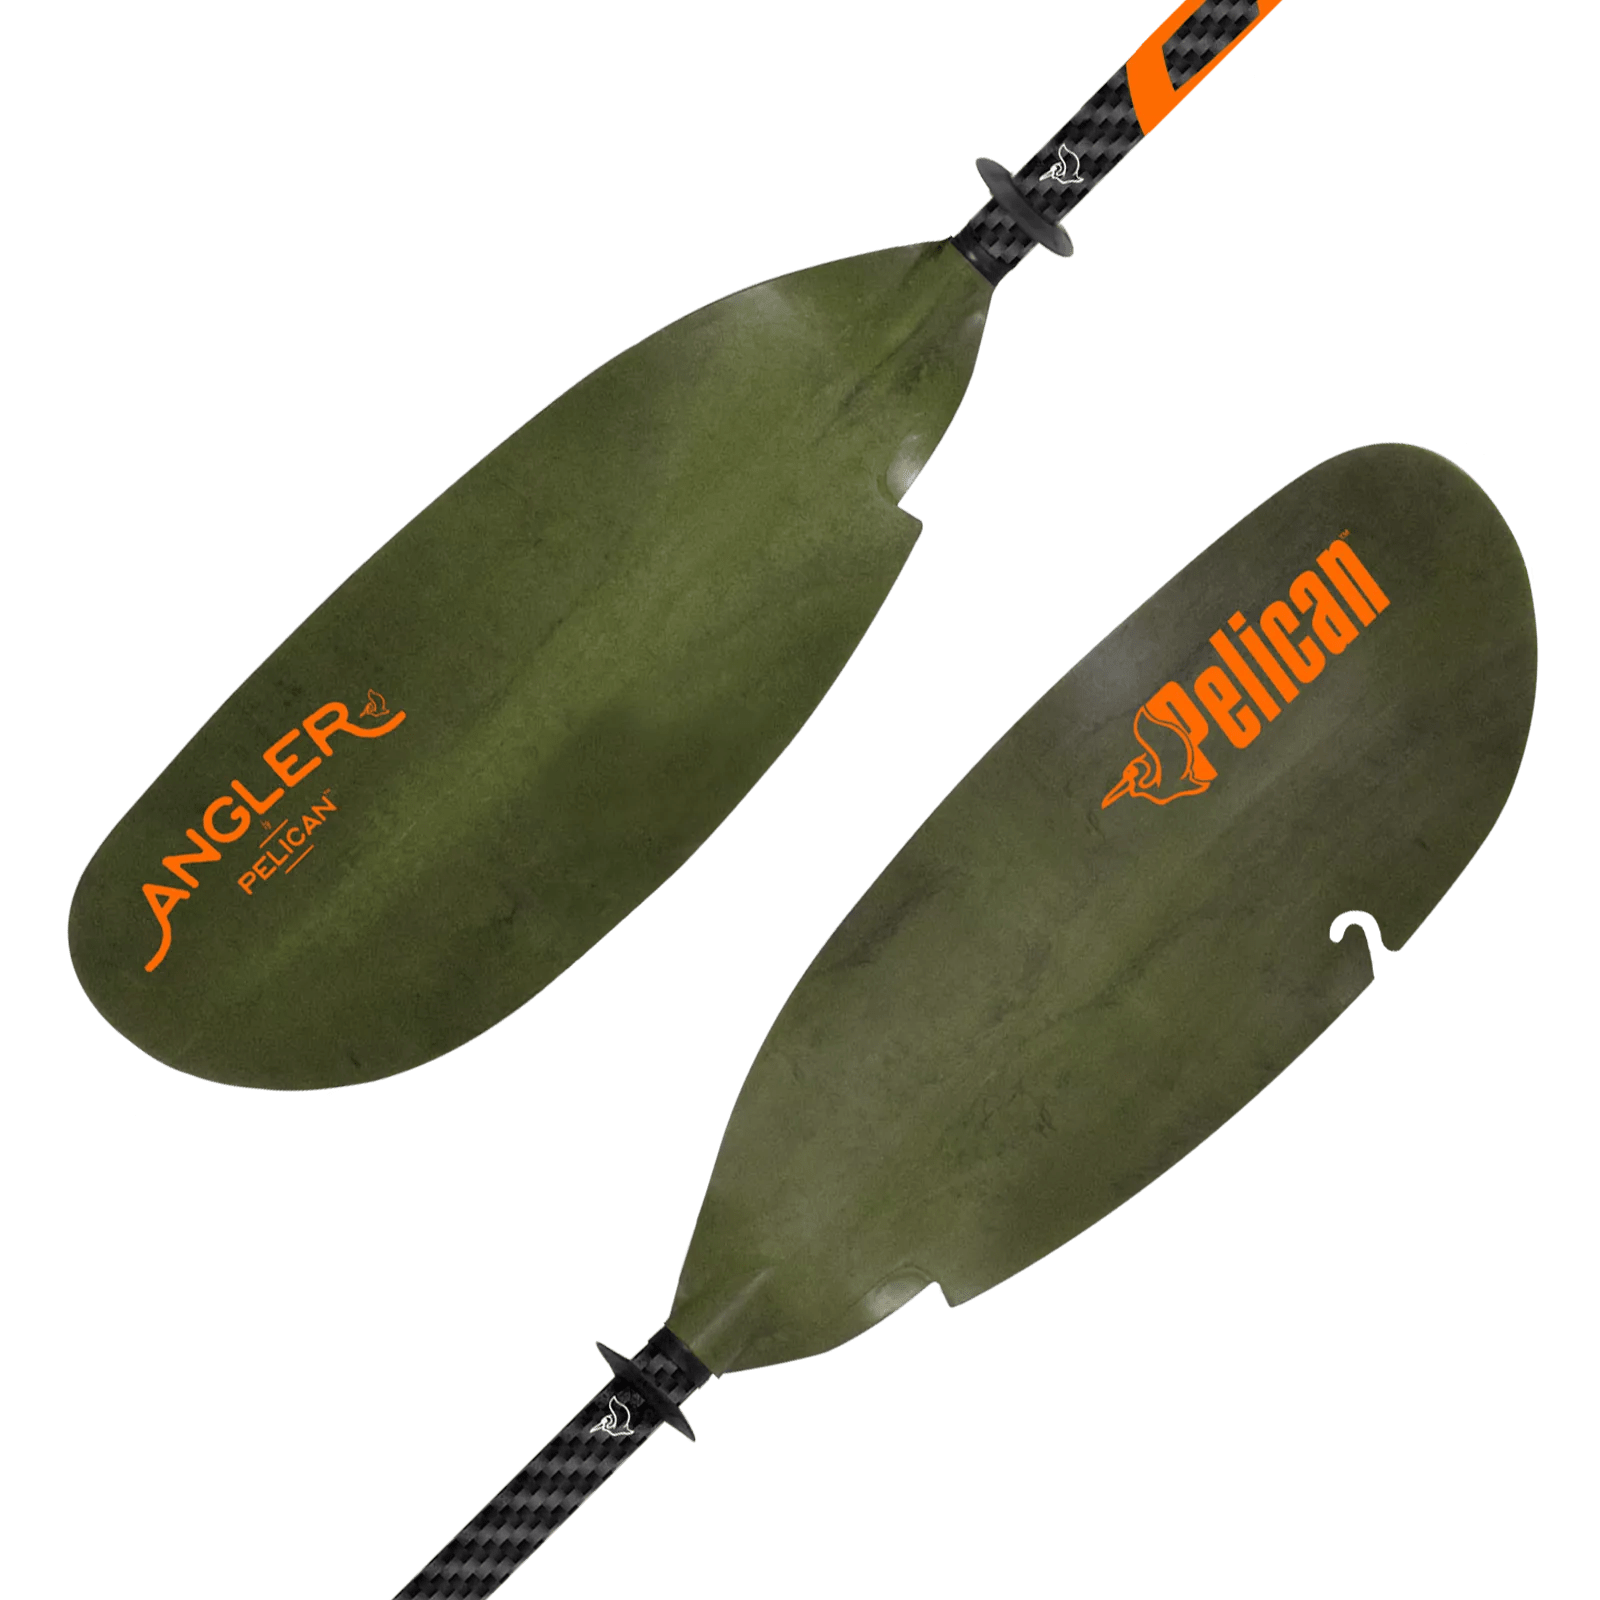 PELICAN - Catch Fishing Kayak Paddle 250 cm (98.5") - Olive - PS1975-00 - ISO